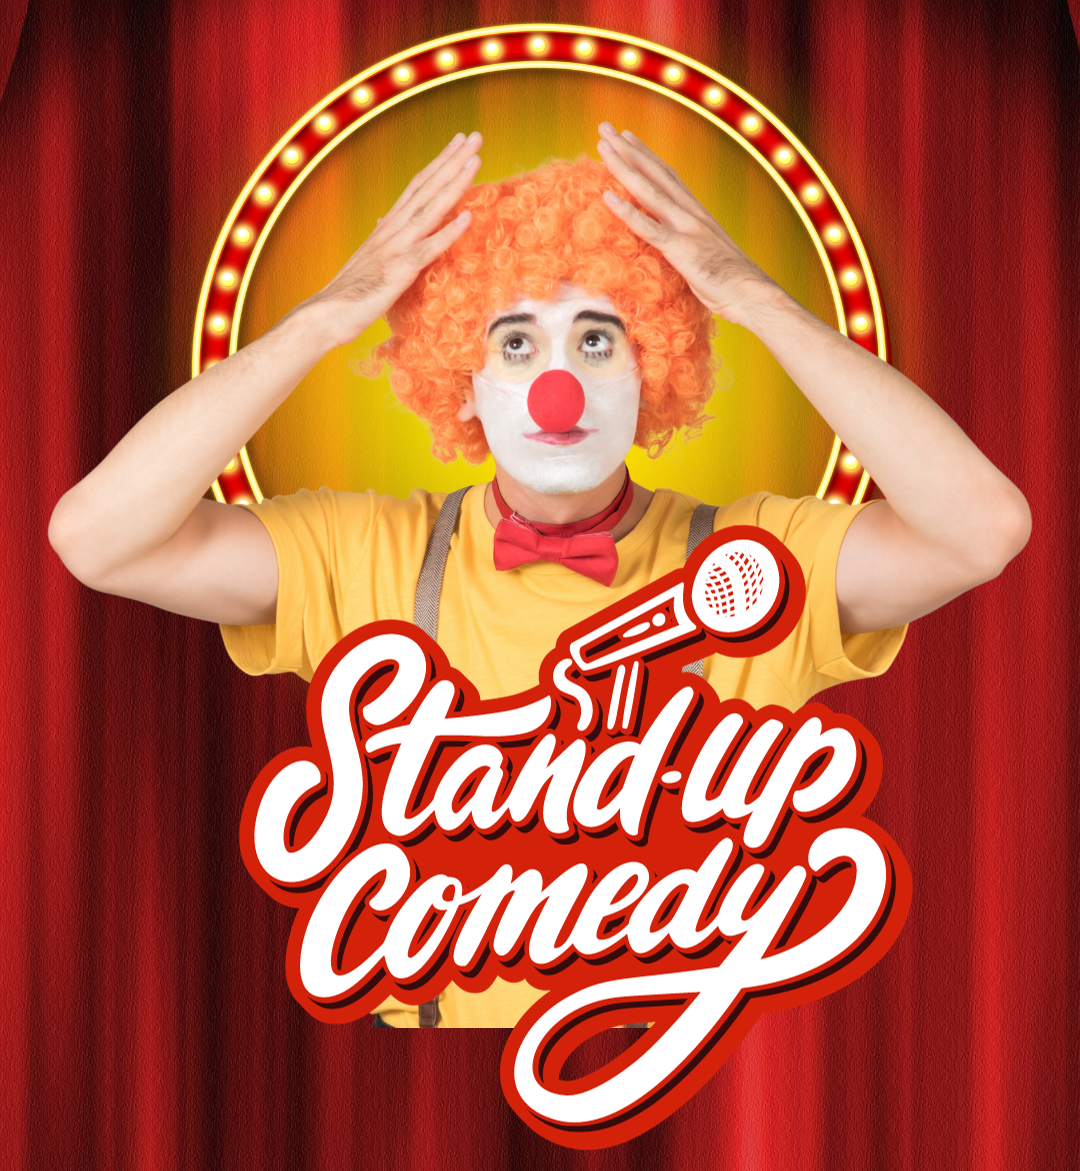 Leg-Up Comedy Club - Giving new talent a boost!